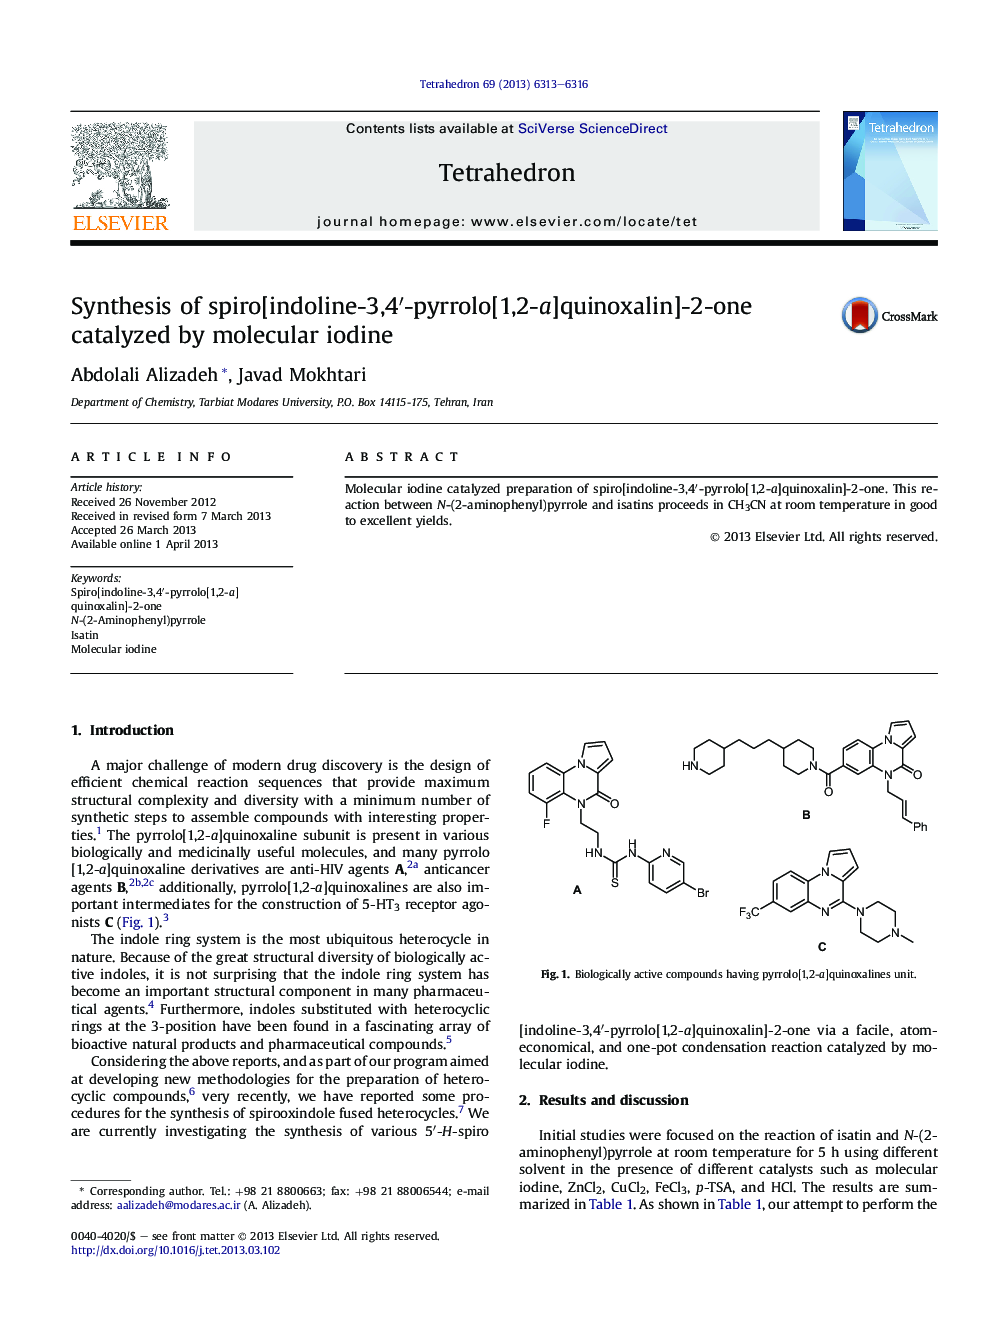 Synthesis of spiro[indoline-3,4â²-pyrrolo[1,2-a]quinoxalin]-2-one catalyzed by molecular iodine